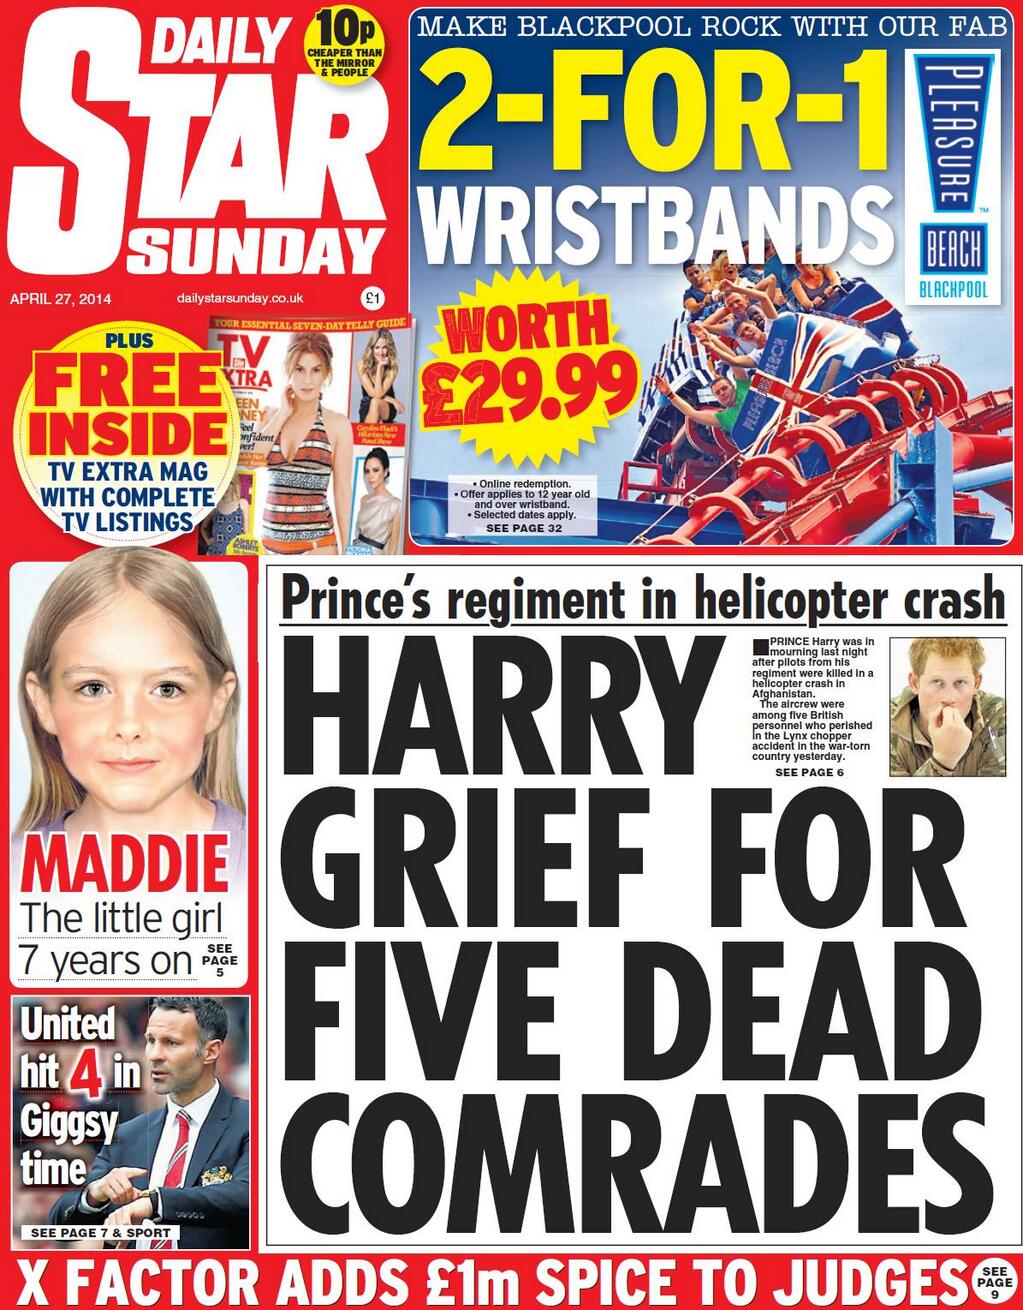 Daily Star Front Page 4th of November 2020 - Tomorrows 